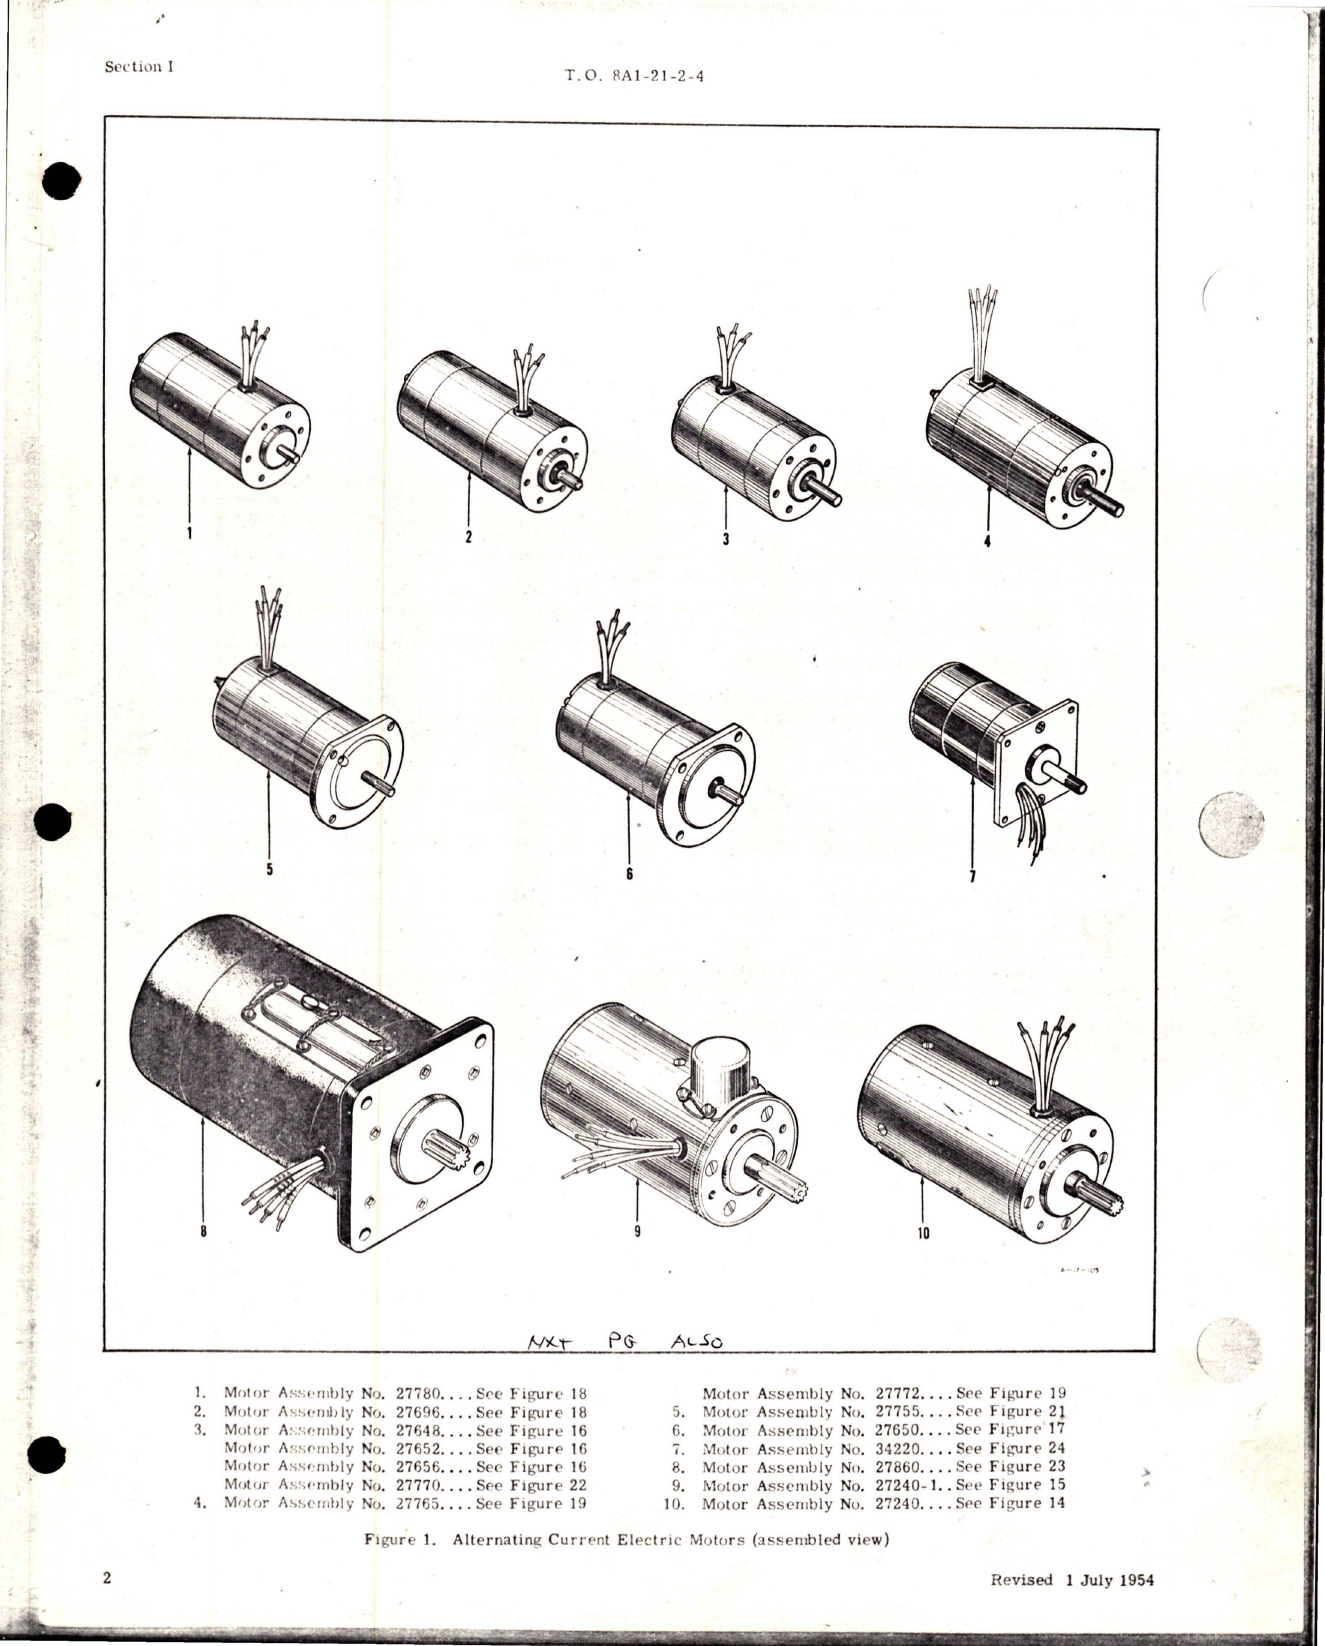 Sample page 9 from AirCorps Library document: Parts Catalog for Electric Motors 